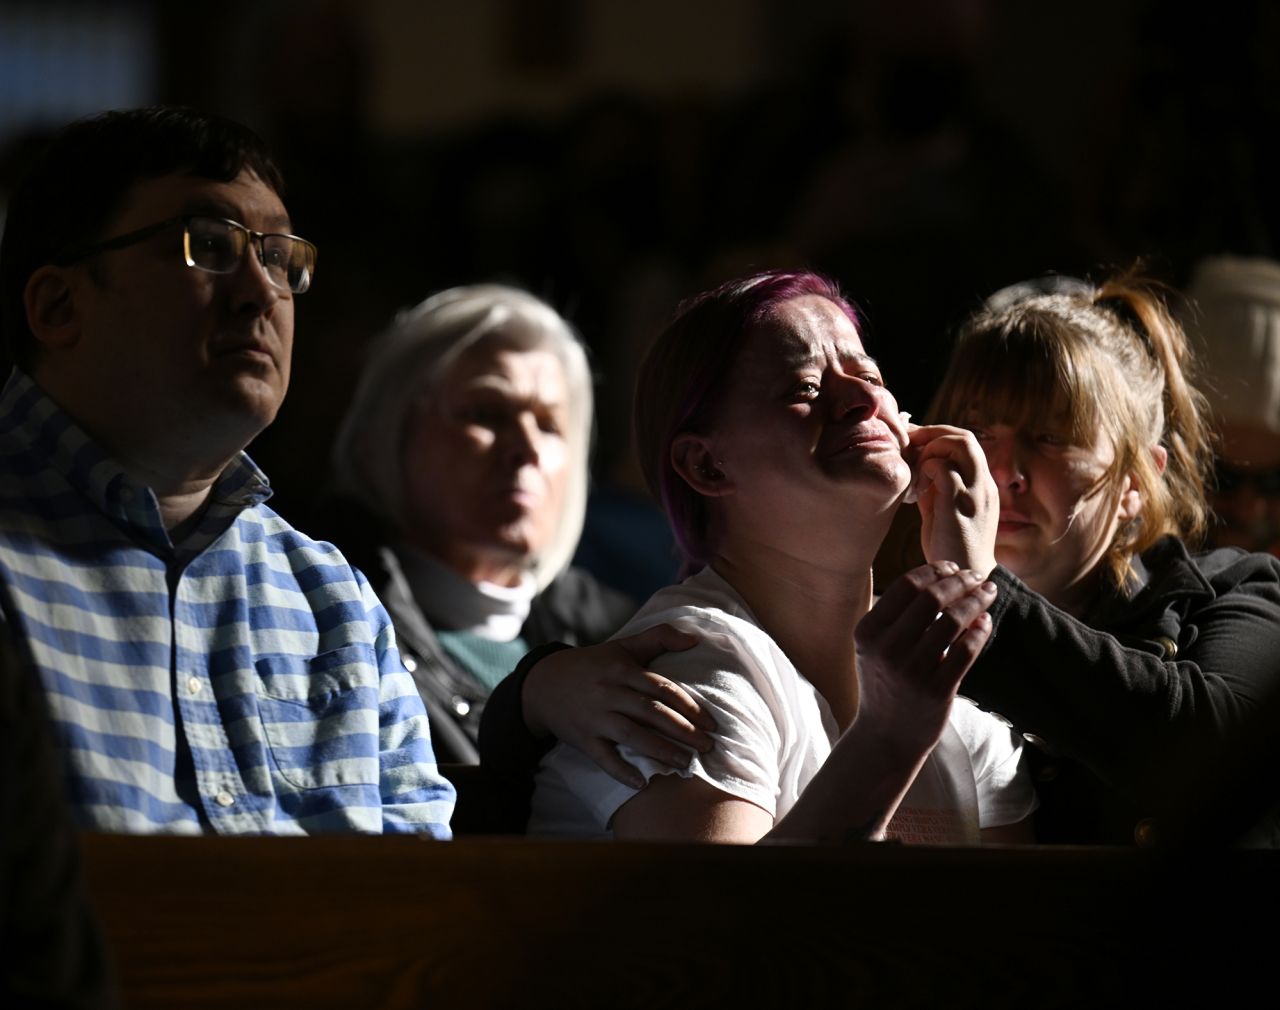 Jessi Hazelward, right, wipes a tear from her friend Amanda Grueschow's face during a vigil for the victims of an overnight shooting at Club Q, an LGBTQ nightclub in Colorado Springs, Colorado, on Sunday, November 20.